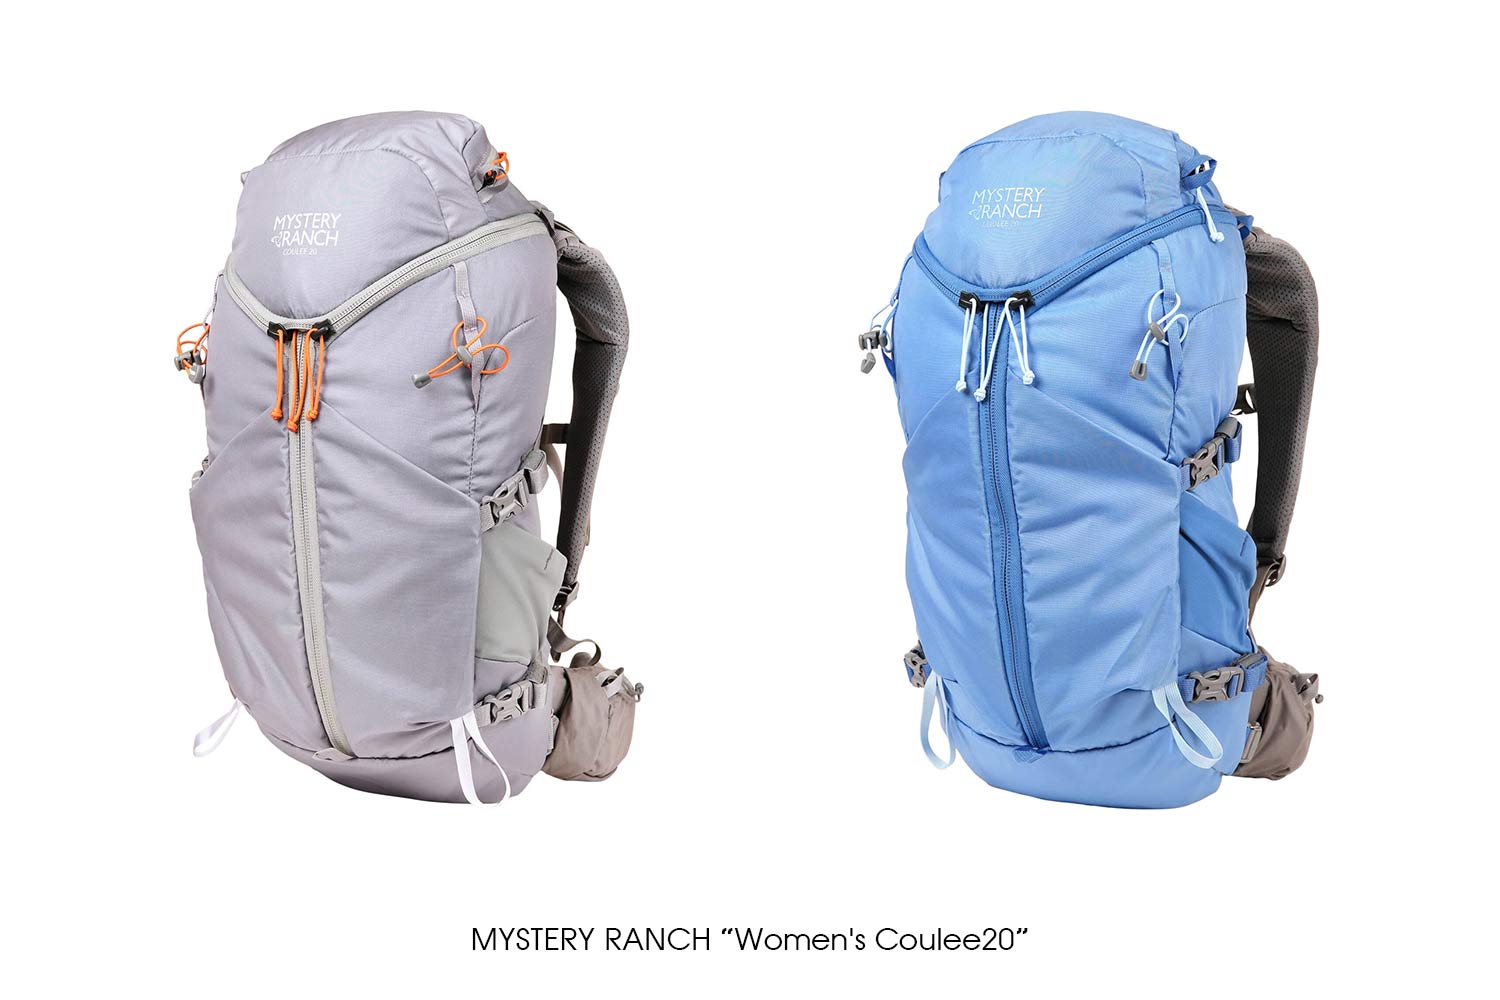 MYSTERY RANCH "Women's Coulee 20"